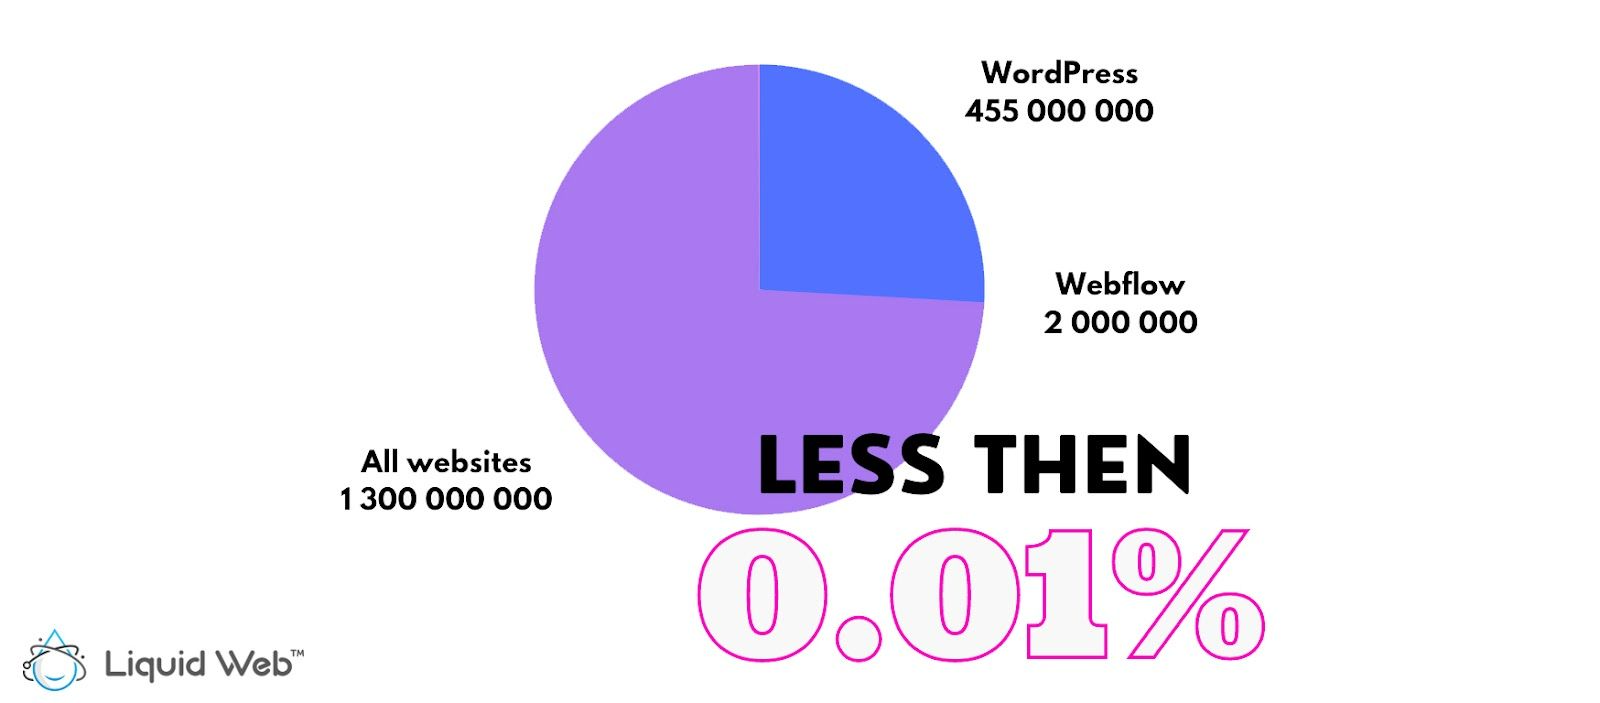 WordPress is the king in the world of site builders. We see this picture by comparing how many users in Webflow and WordPress.